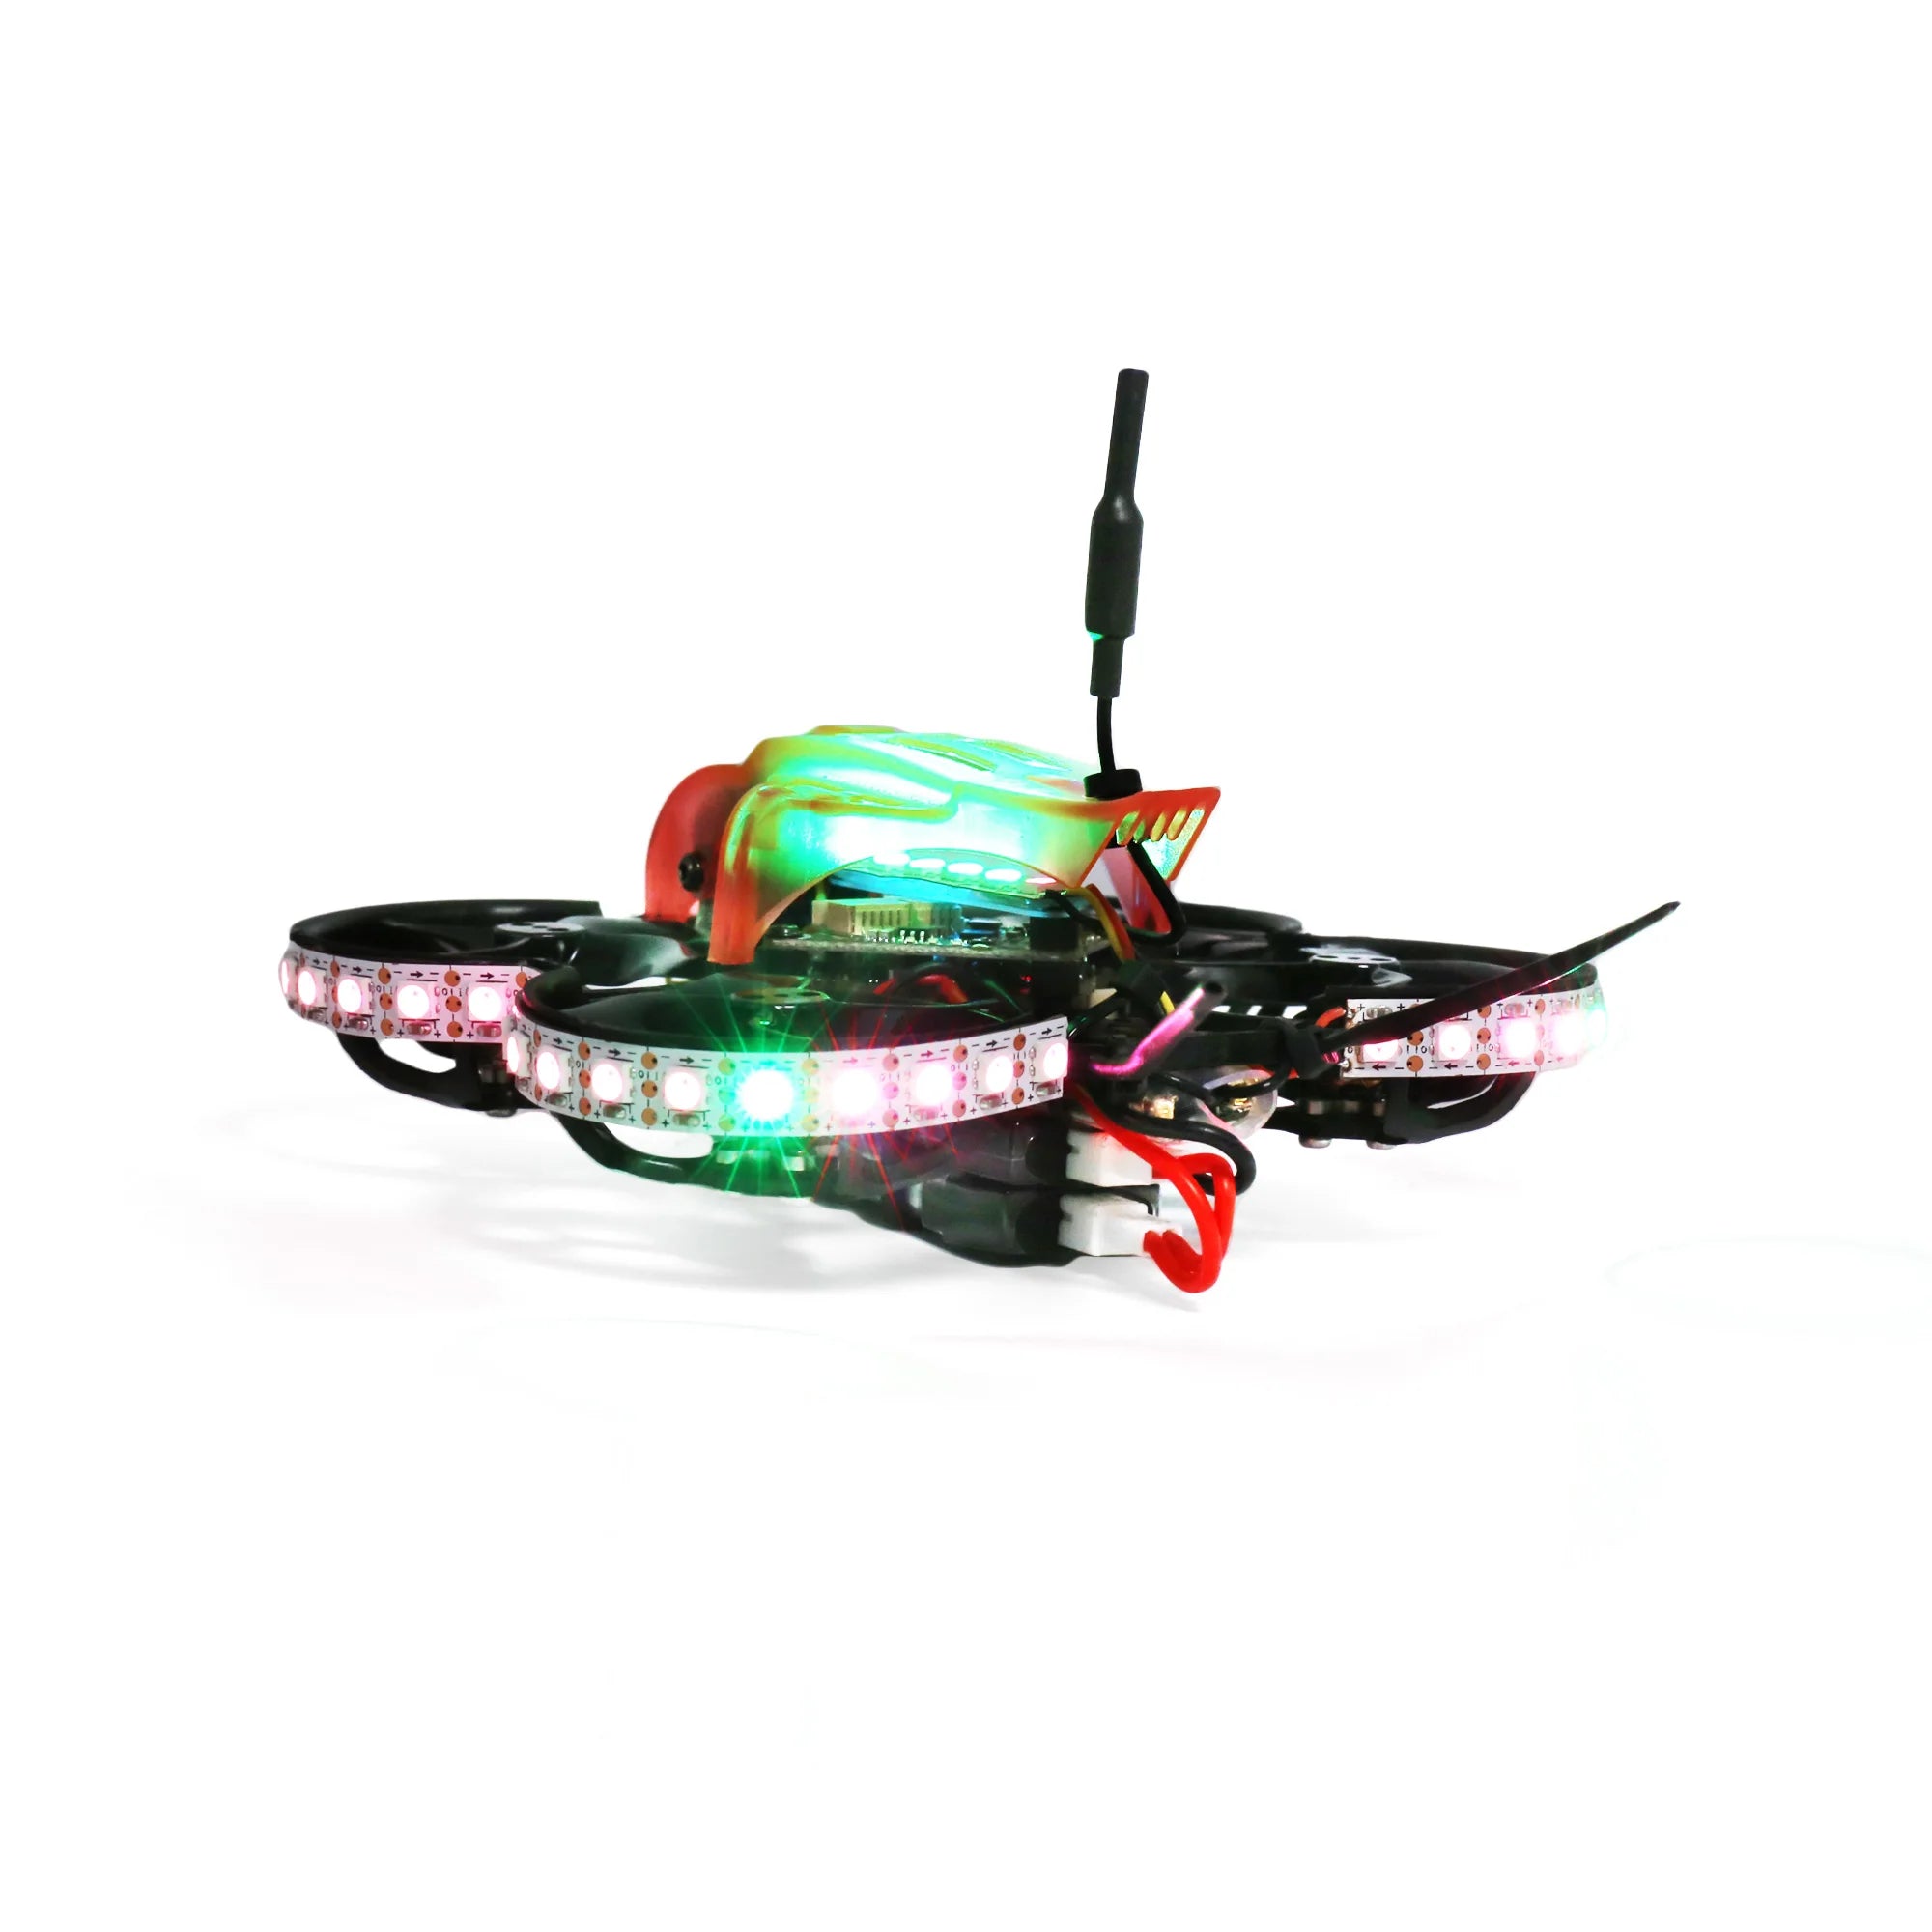 GEPRC TinyGO LED  Whoop RTF FPV Drone, GEPRC TinyGO LED Whoop RTF FPV Drone -